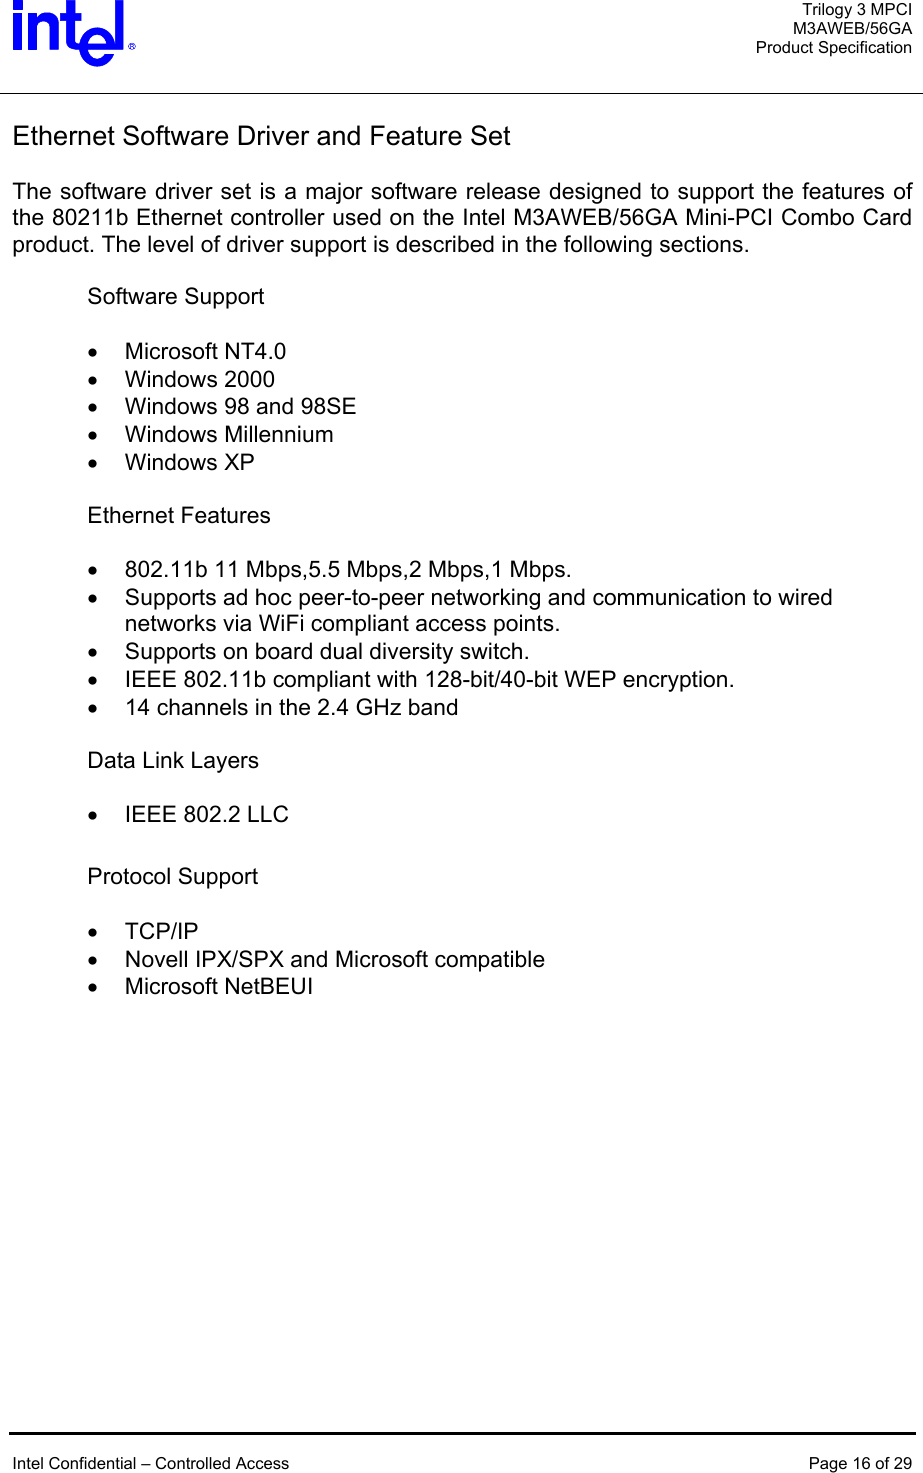  Trilogy 3 MPCI M3AWEB/56GA Product Specification   Ethernet Software Driver and Feature Set  The software driver set is a major software release designed to support the features of the 80211b Ethernet controller used on the Intel M3AWEB/56GA Mini-PCI Combo Card product. The level of driver support is described in the following sections.   Software Support  •  Microsoft NT4.0 •  Windows 2000  •  Windows 98 and 98SE •  Windows Millennium  •  Windows XP  Ethernet Features  •  802.11b 11 Mbps,5.5 Mbps,2 Mbps,1 Mbps. •  Supports ad hoc peer-to-peer networking and communication to wired networks via WiFi compliant access points. •  Supports on board dual diversity switch. •  IEEE 802.11b compliant with 128-bit/40-bit WEP encryption. •  14 channels in the 2.4 GHz band  Data Link Layers  •  IEEE 802.2 LLC  Protocol Support   •  TCP/IP •  Novell IPX/SPX and Microsoft compatible •  Microsoft NetBEUI    Intel Confidential – Controlled Access  Page 16 of 29  